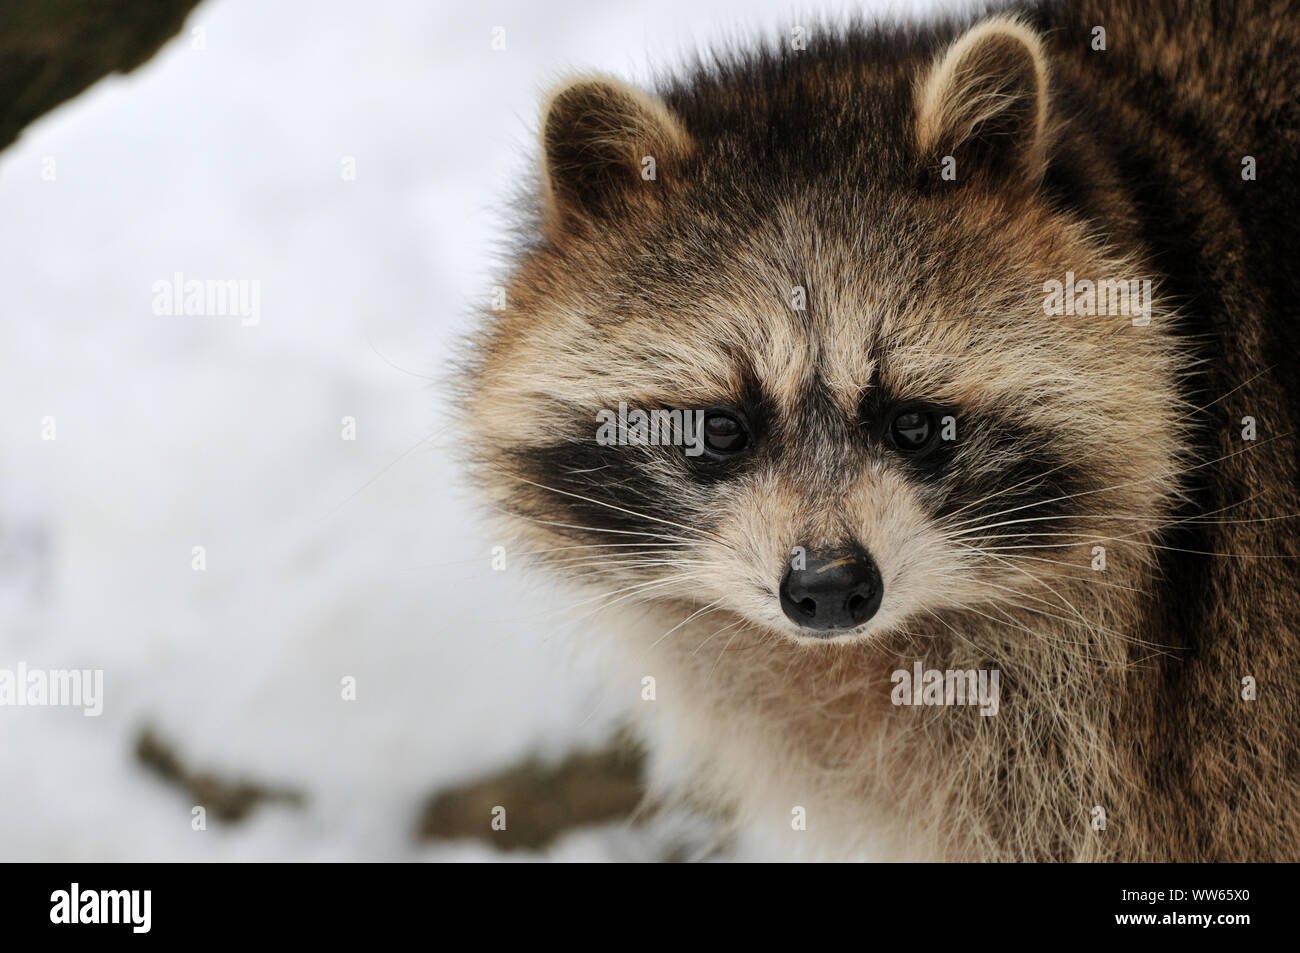 North American racoon, Procyon lotor Stock Photo